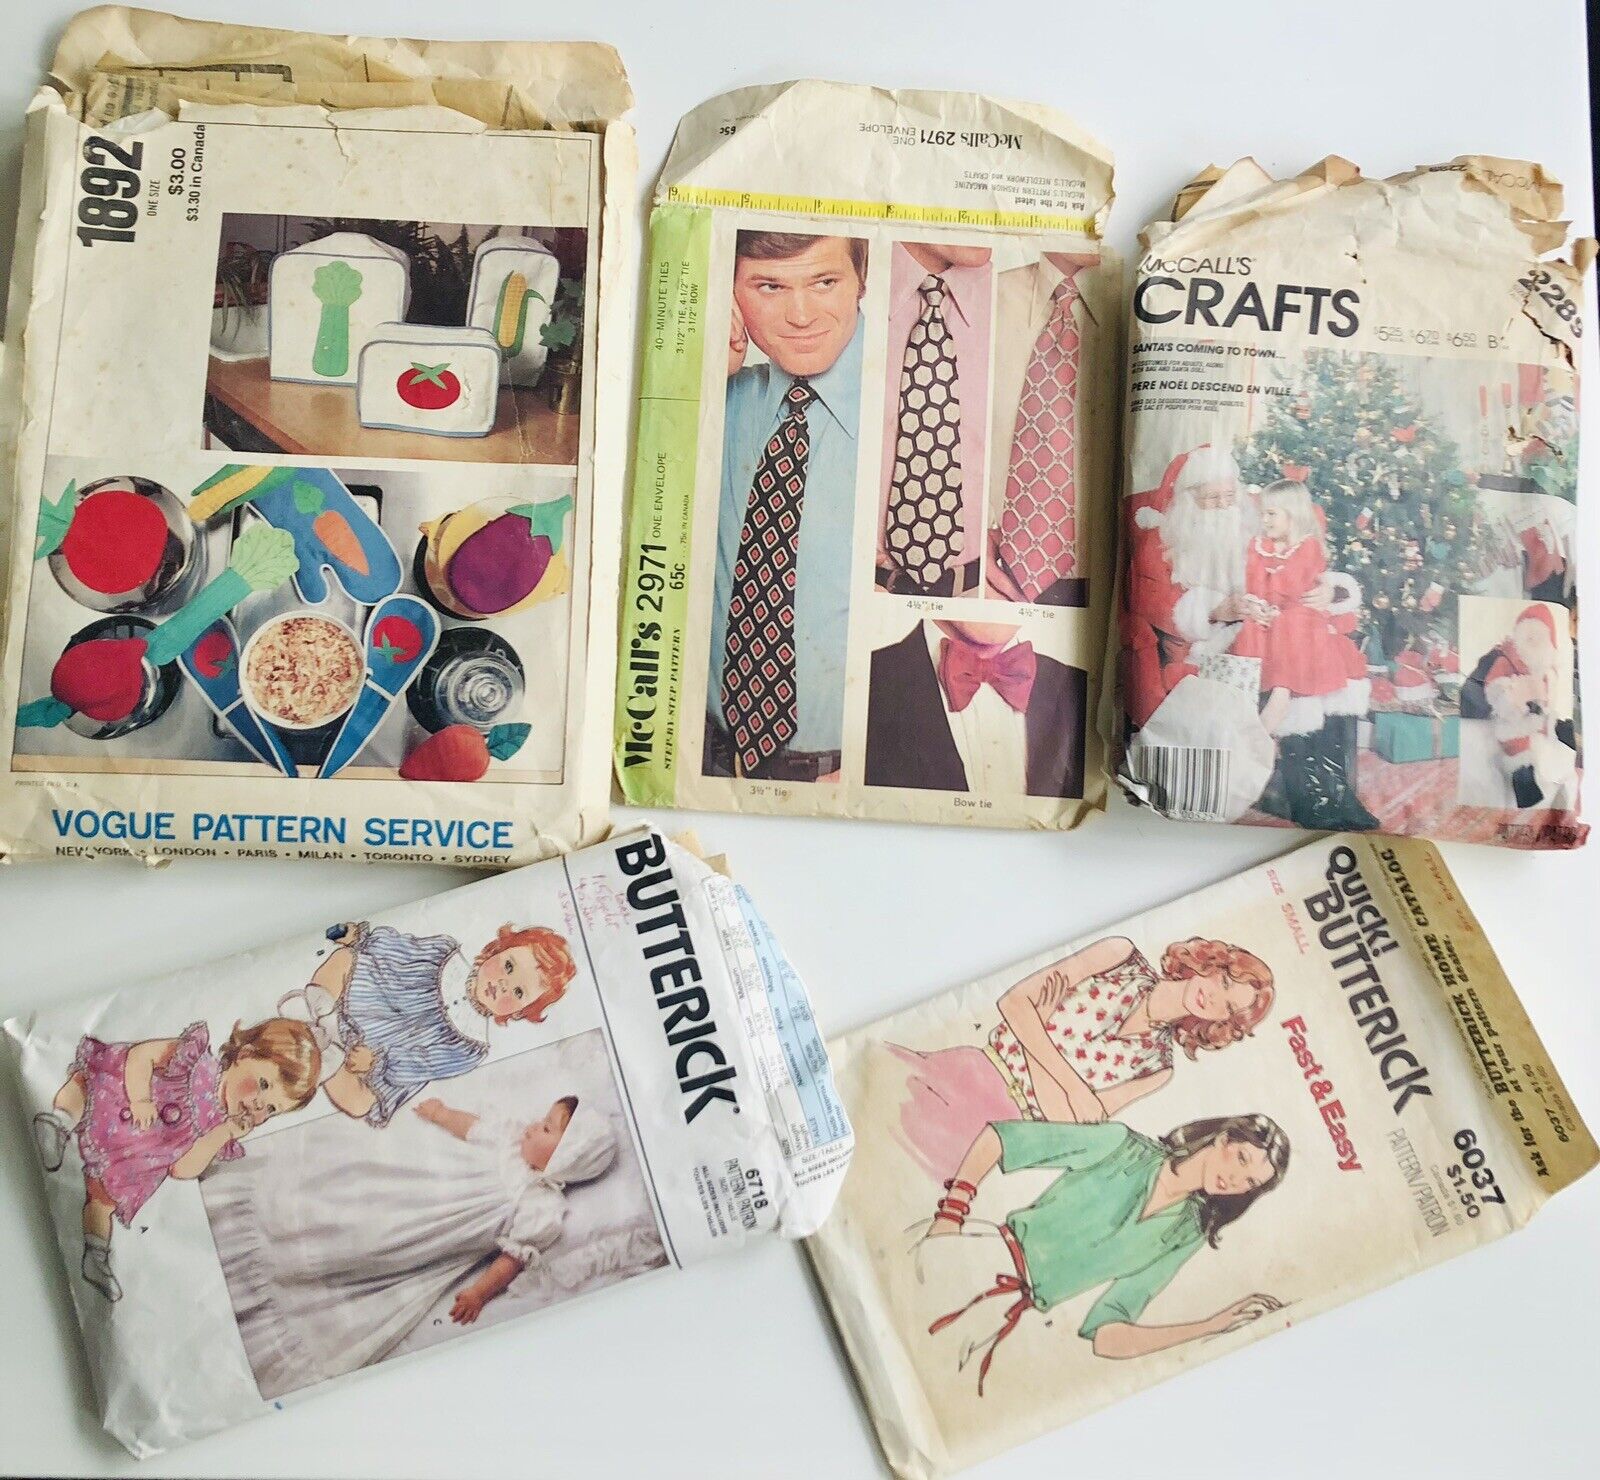 Lot 5 Cut Patterns McCall Vogue Santa Craft Bow Neck Tie Vintage Sewing Clothing